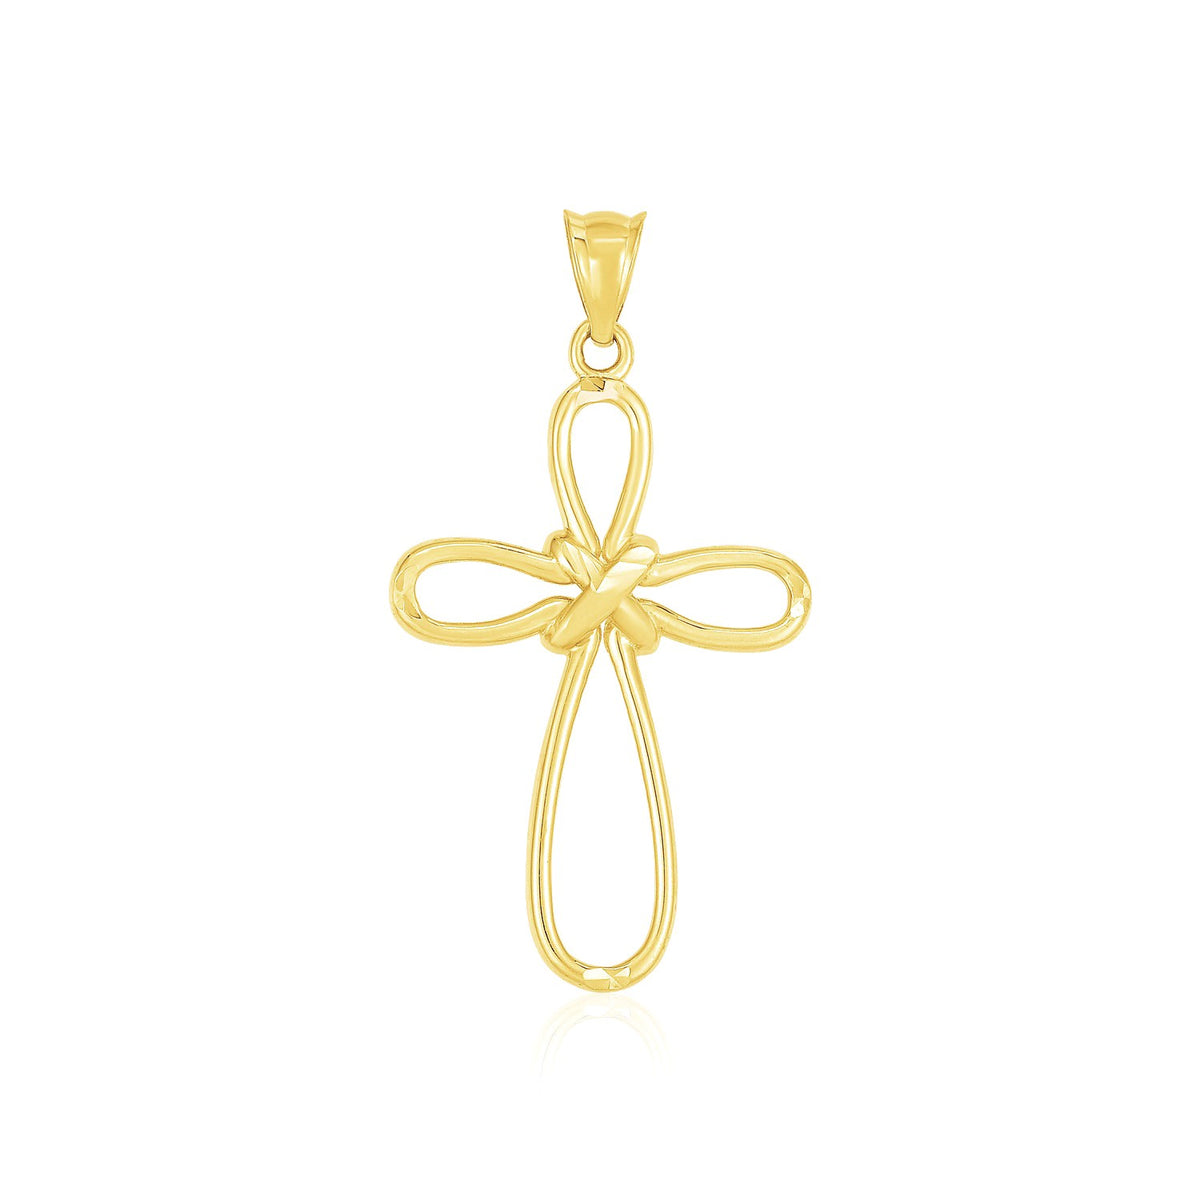 Looped Knot Style Cross Pendant - 14k Yellow Gold